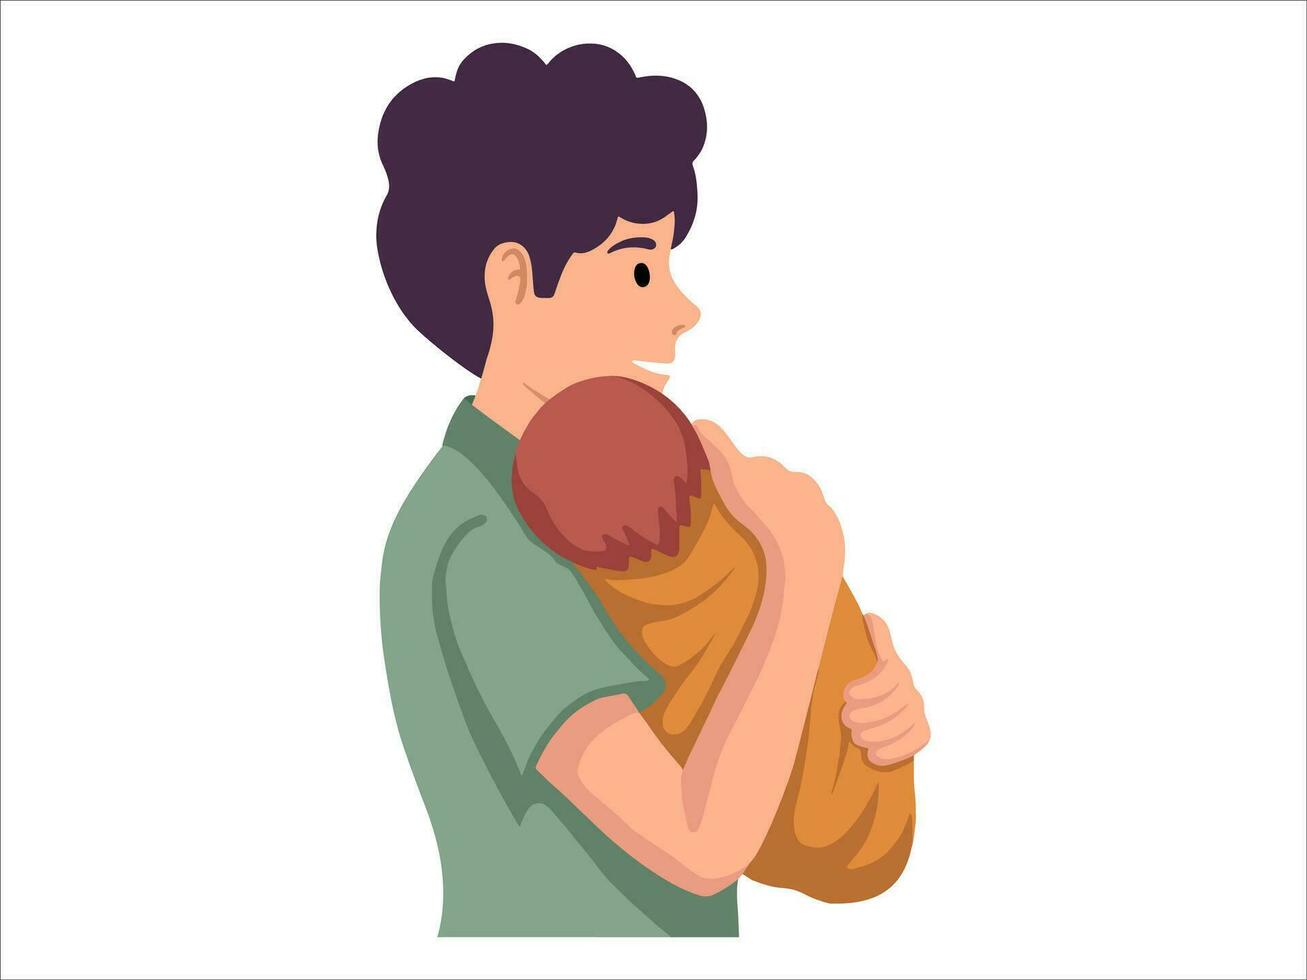 Dad holding baby or avatar icon illustration vector